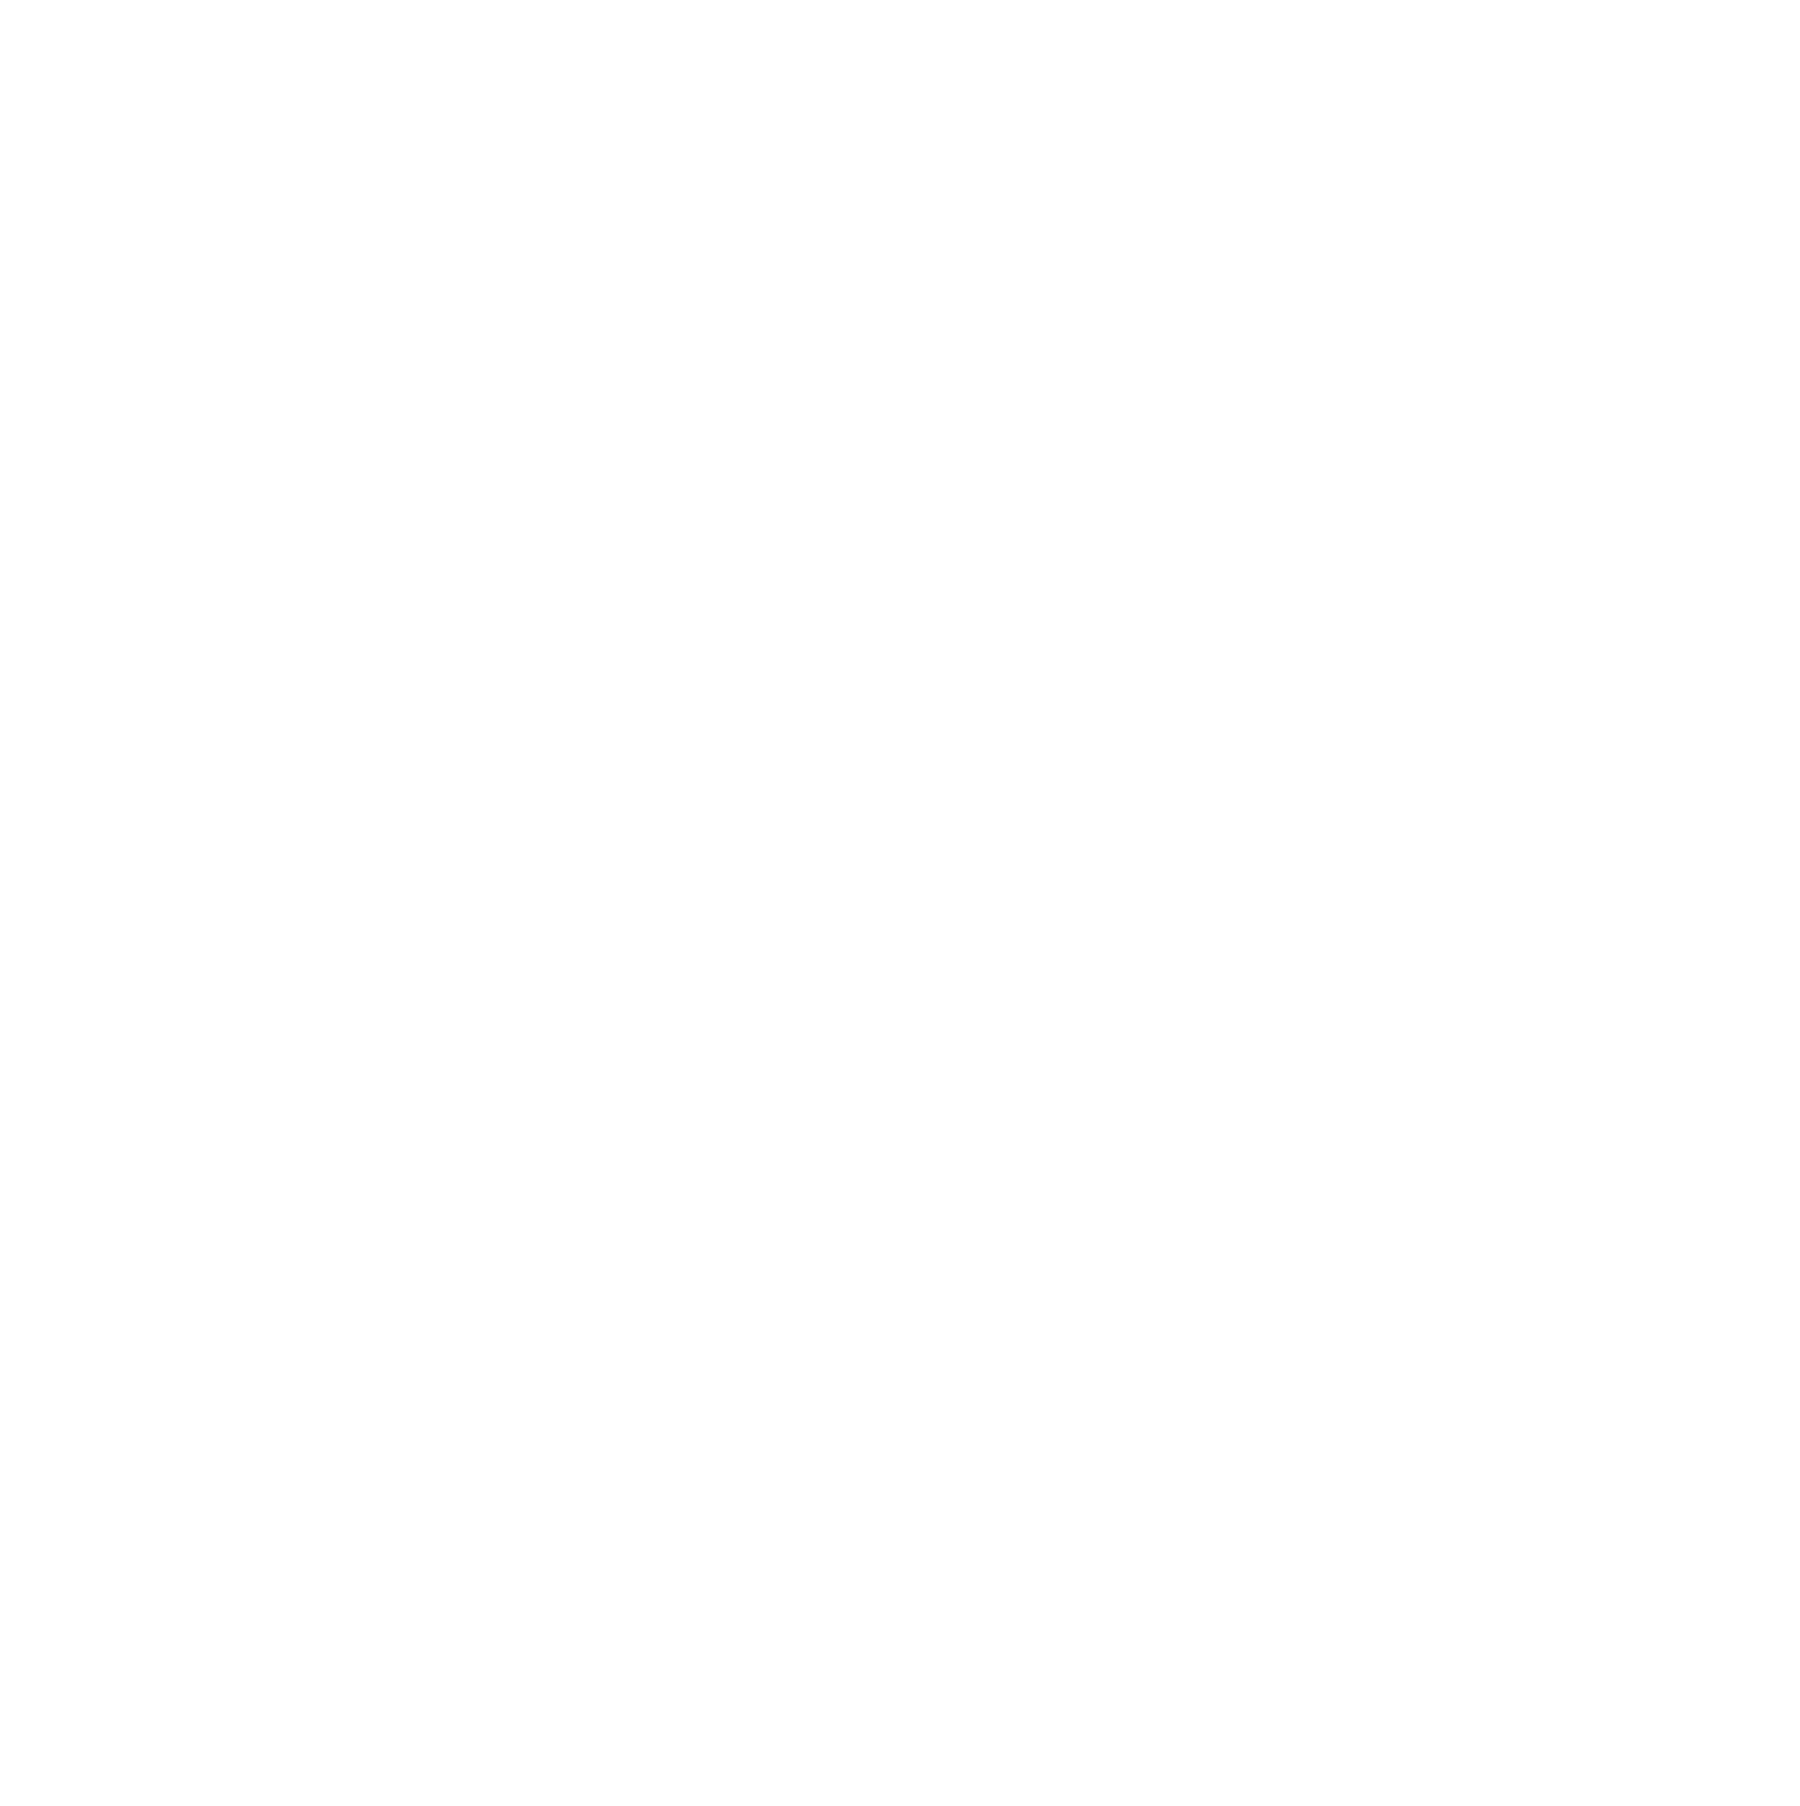 More than majors and minors typography